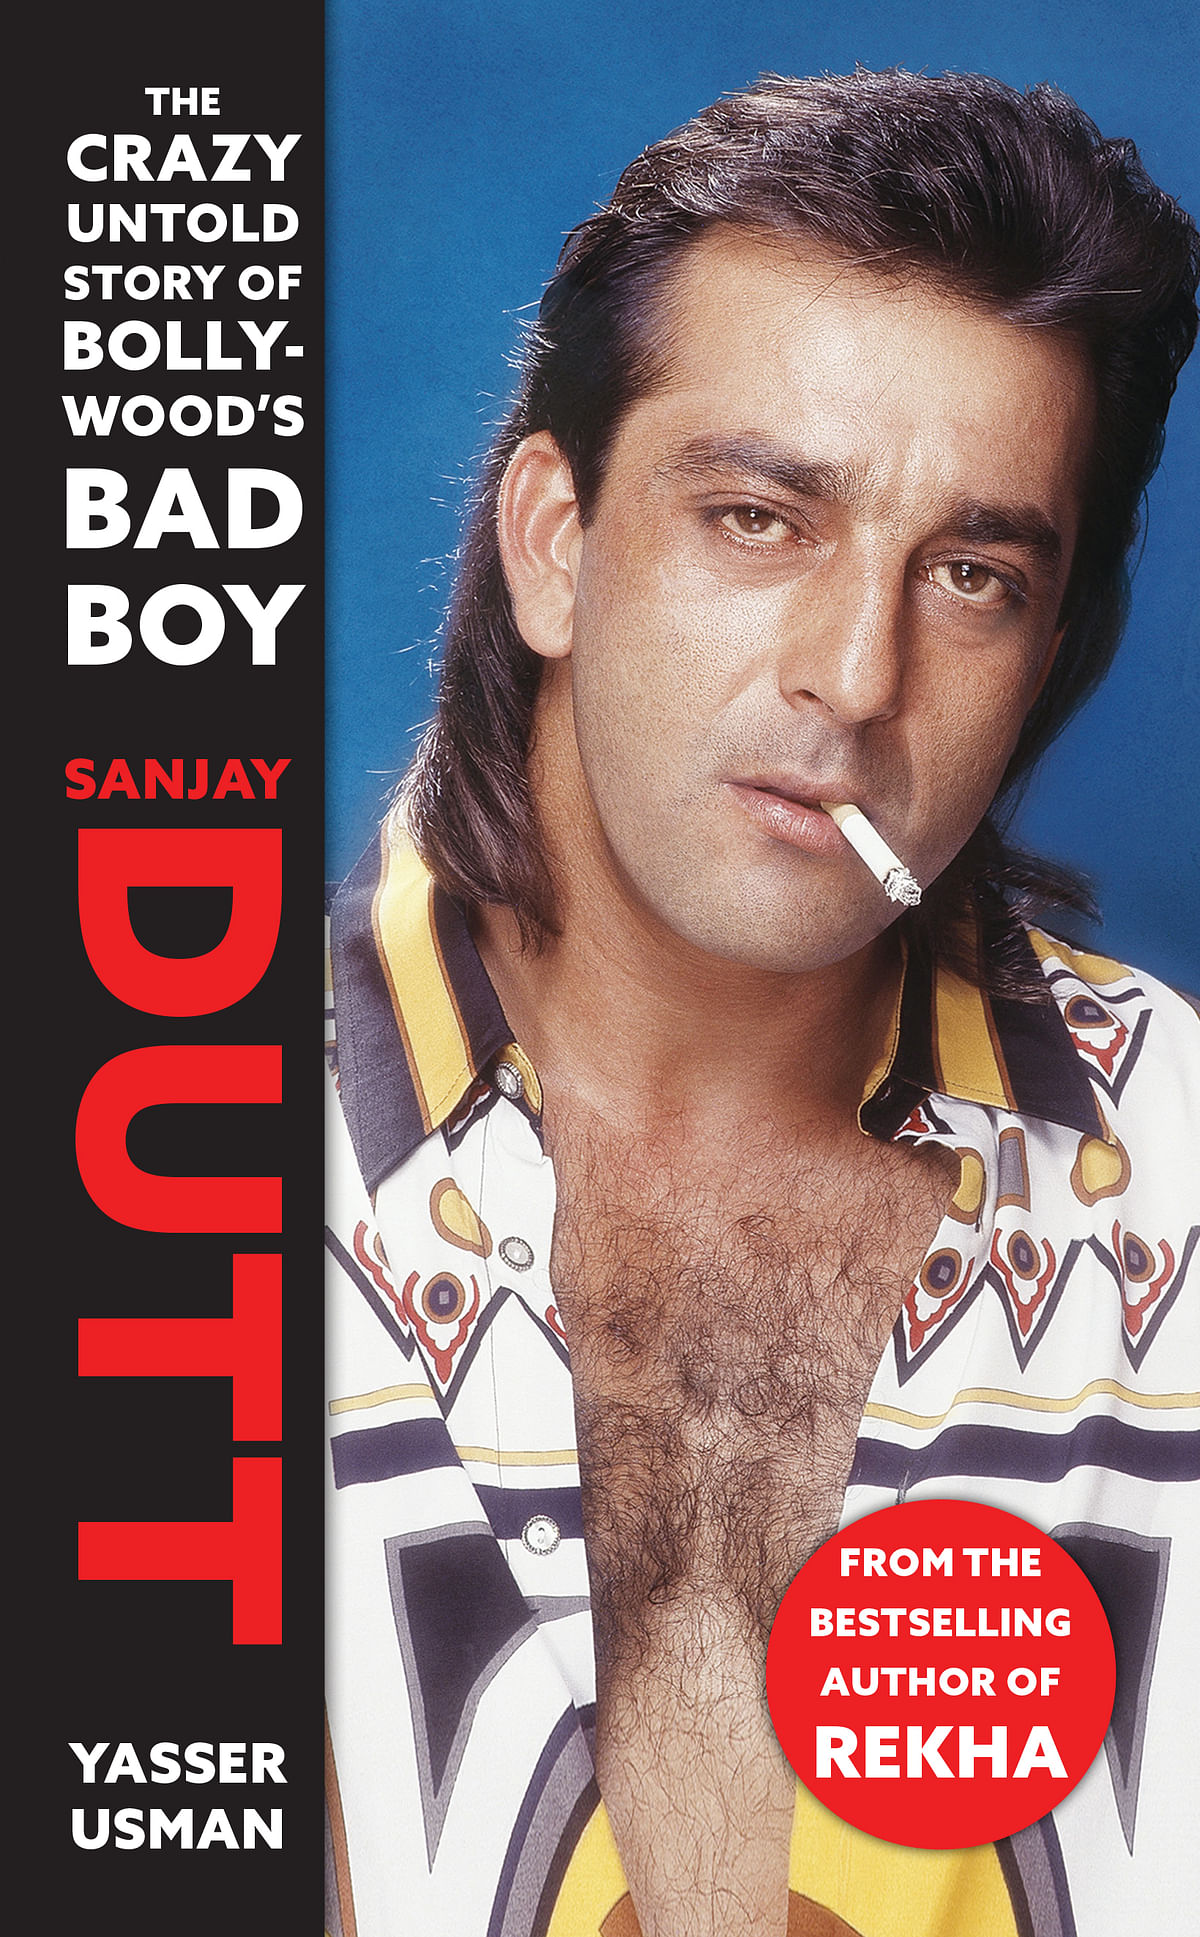 Sanjay Dutt fell in love with and married Richa Sharma when he was 28 years old. 